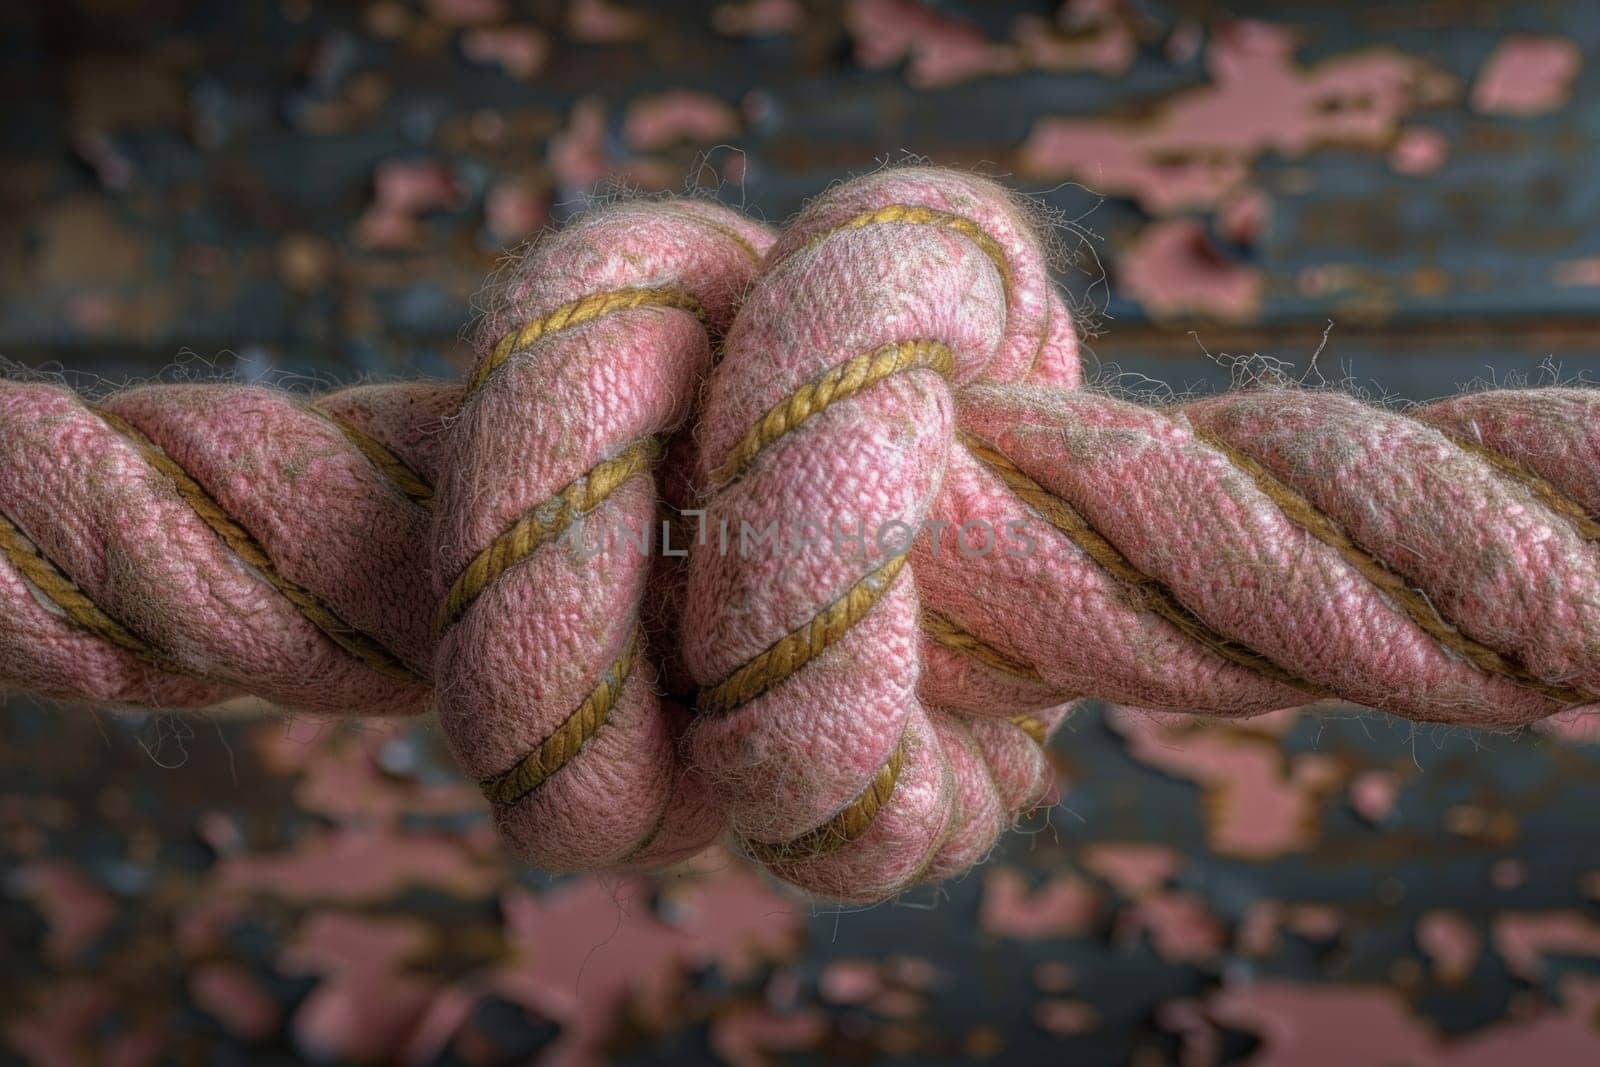 A close-up of a rope with a tight knot, showcasing the intricate details and textures of the twisted material.